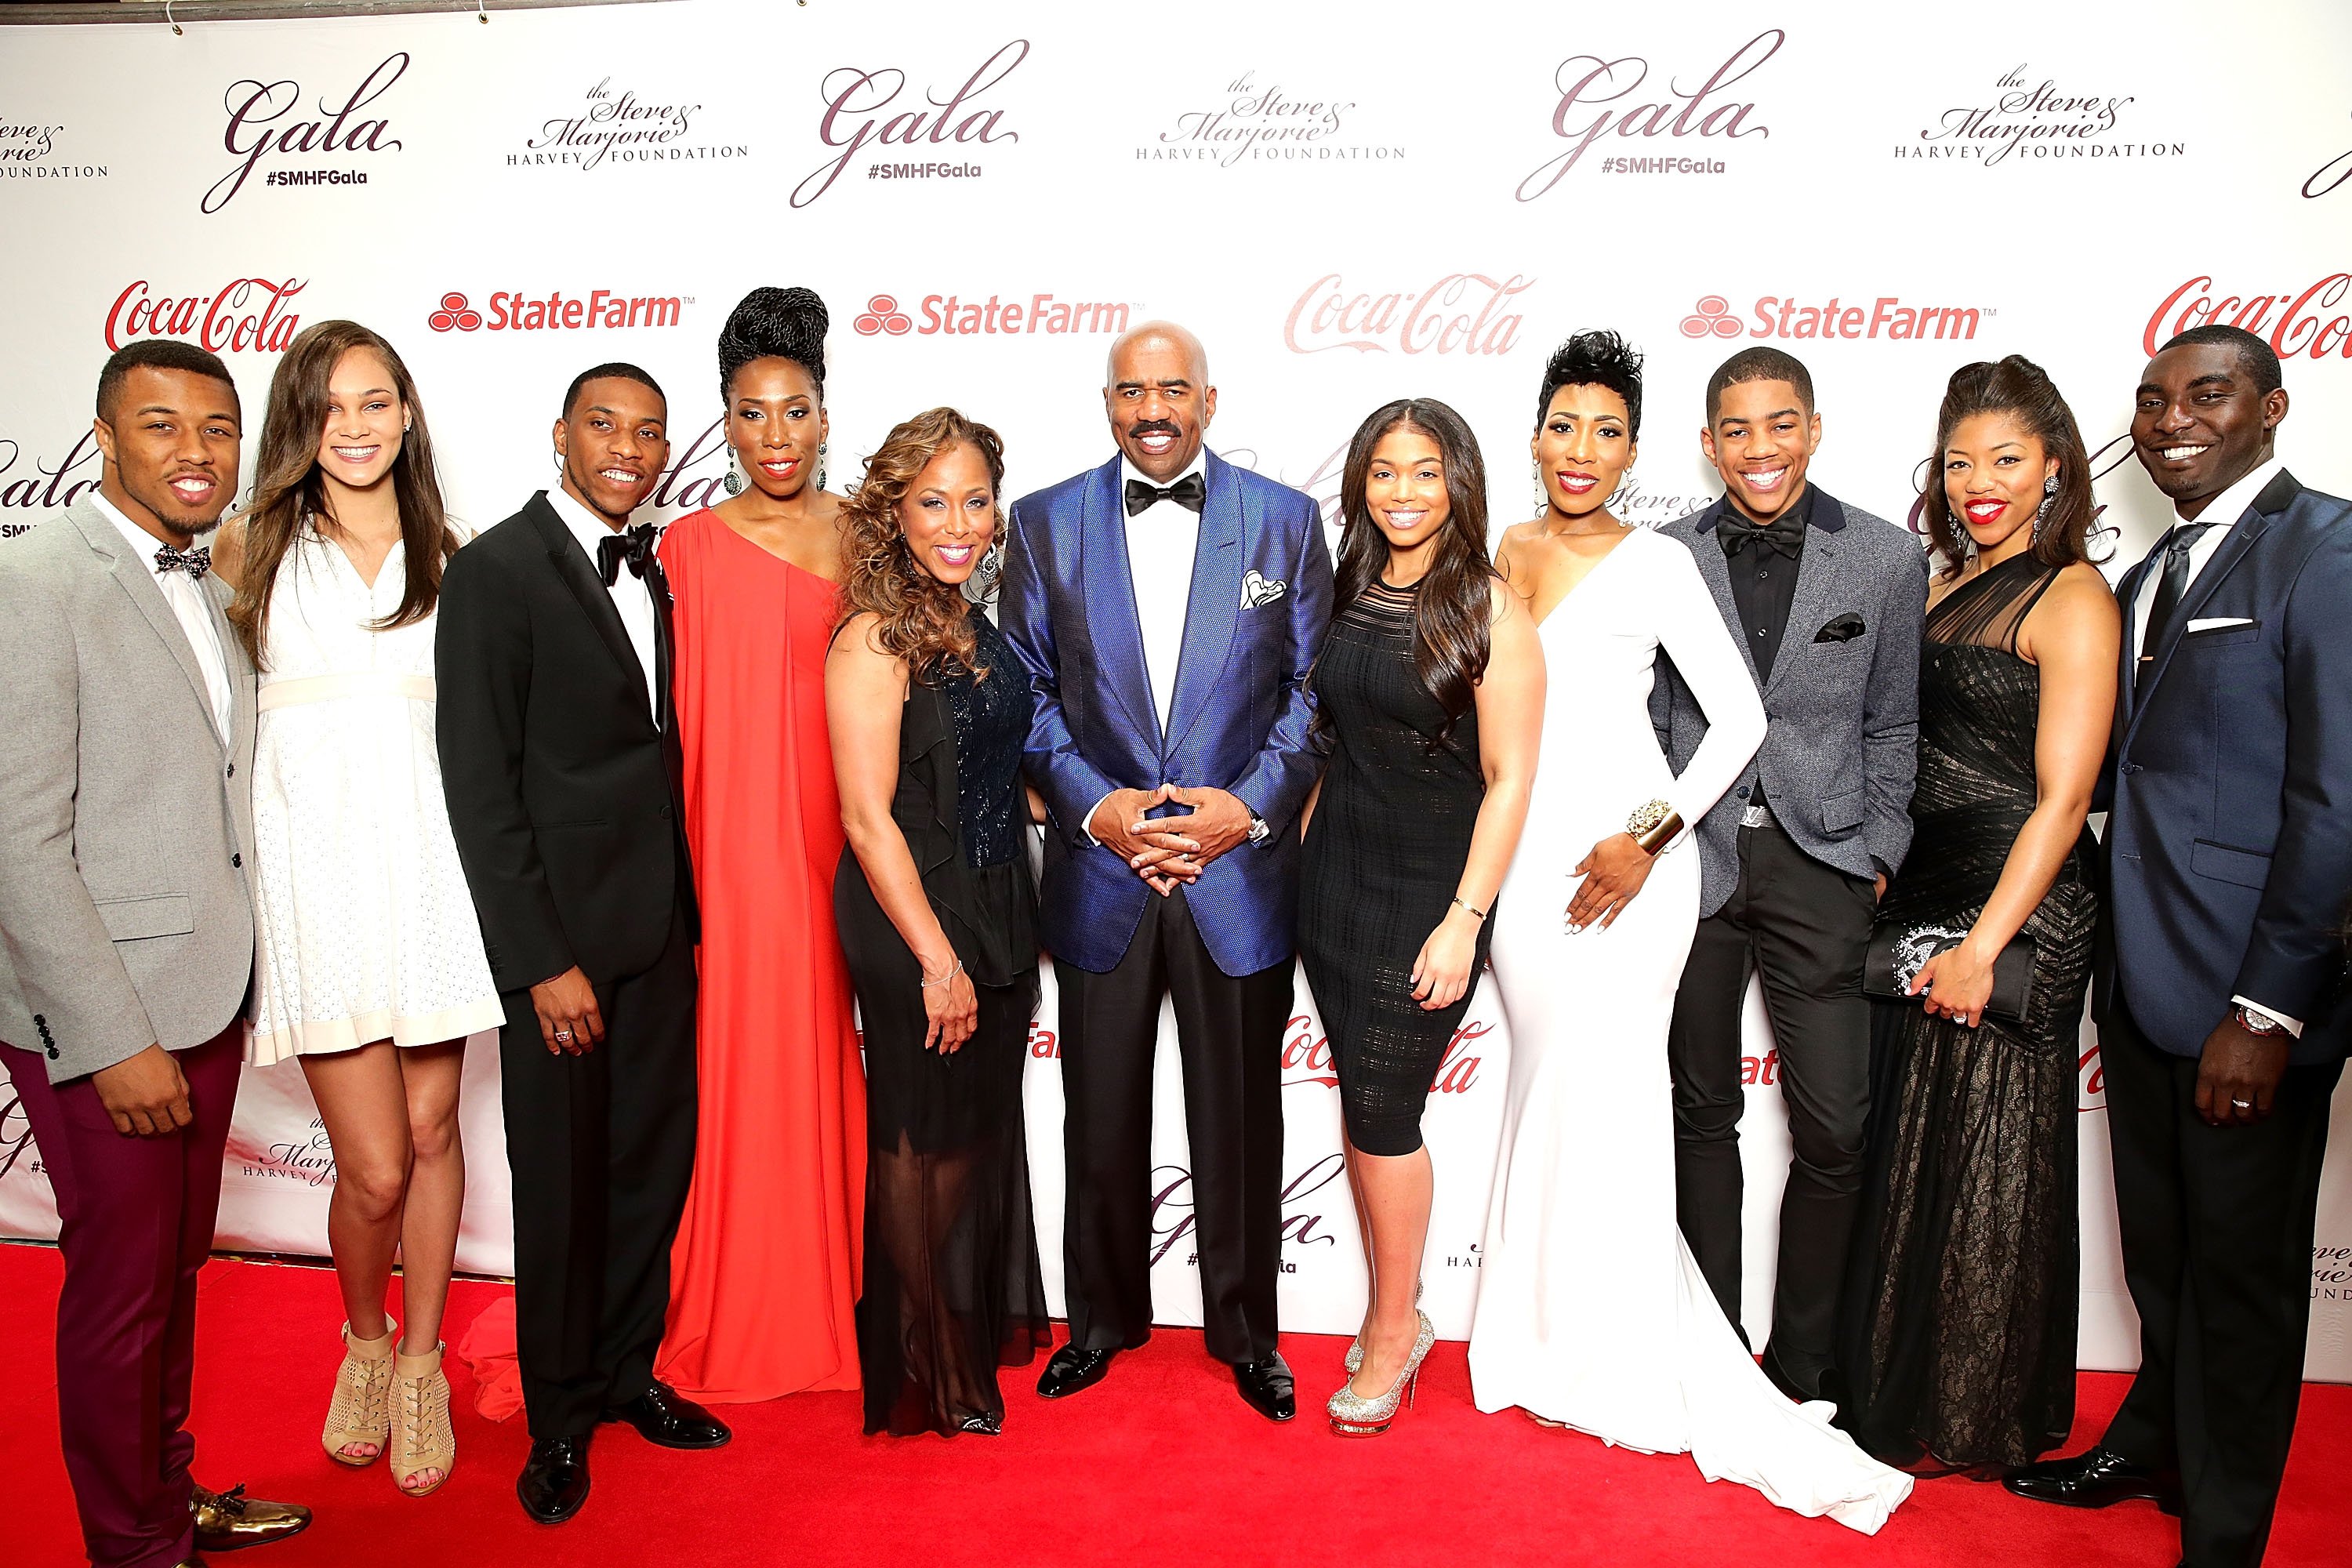 Marjorie and Steve Harvey attend the 2014 Steve & Marjorie Harvey Foundation Gala with their big brood on May 3, 2014 in Chicago, Illinois. | Source: Getty Images